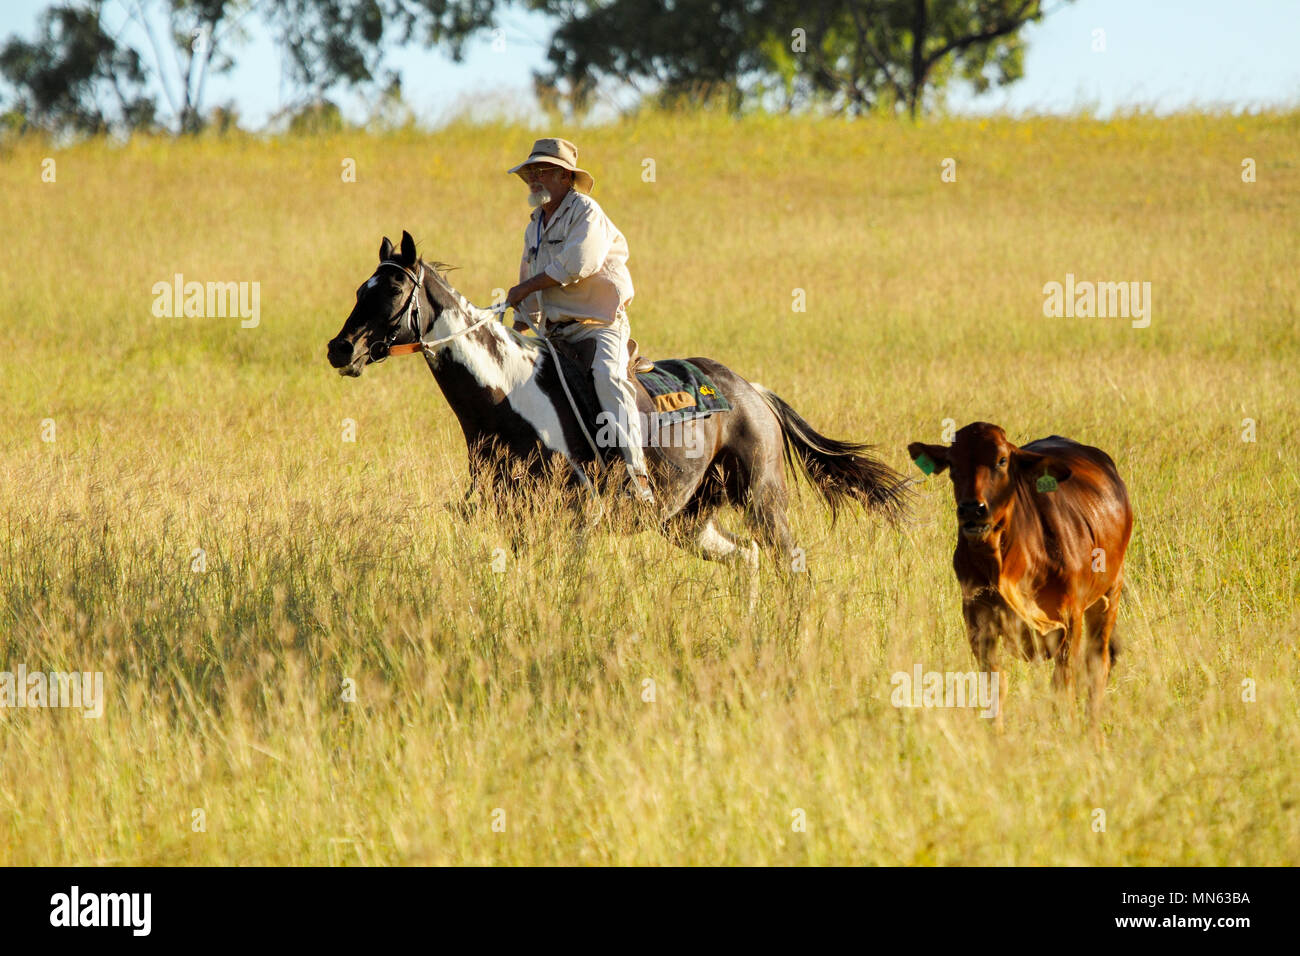 A cowboy on horseback chases a cow. Stock Photo